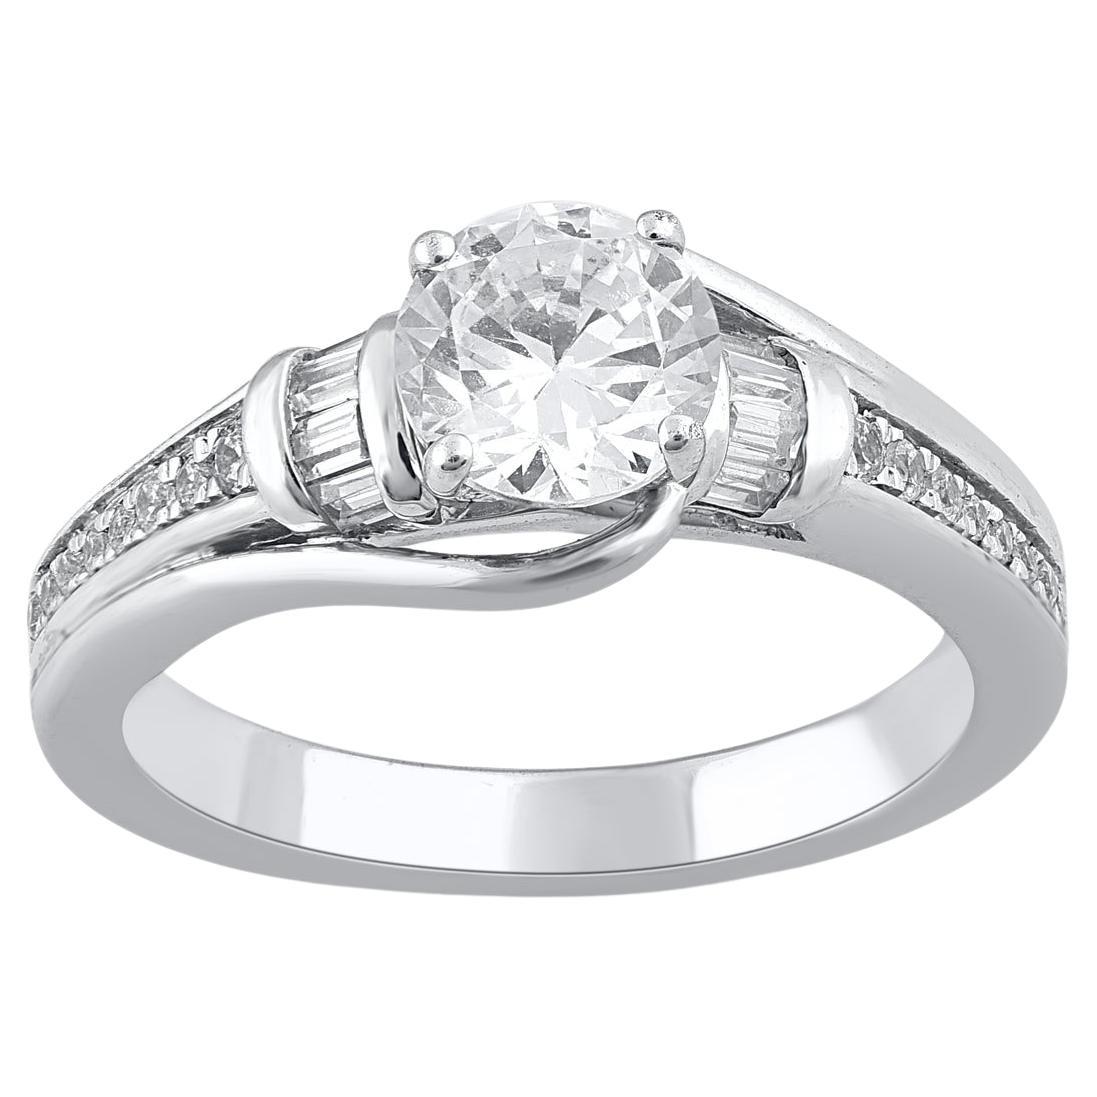 TJD 1.33 Carat Round Cut and Baguette Cut Diamond White Gold Engagement Ring For Sale